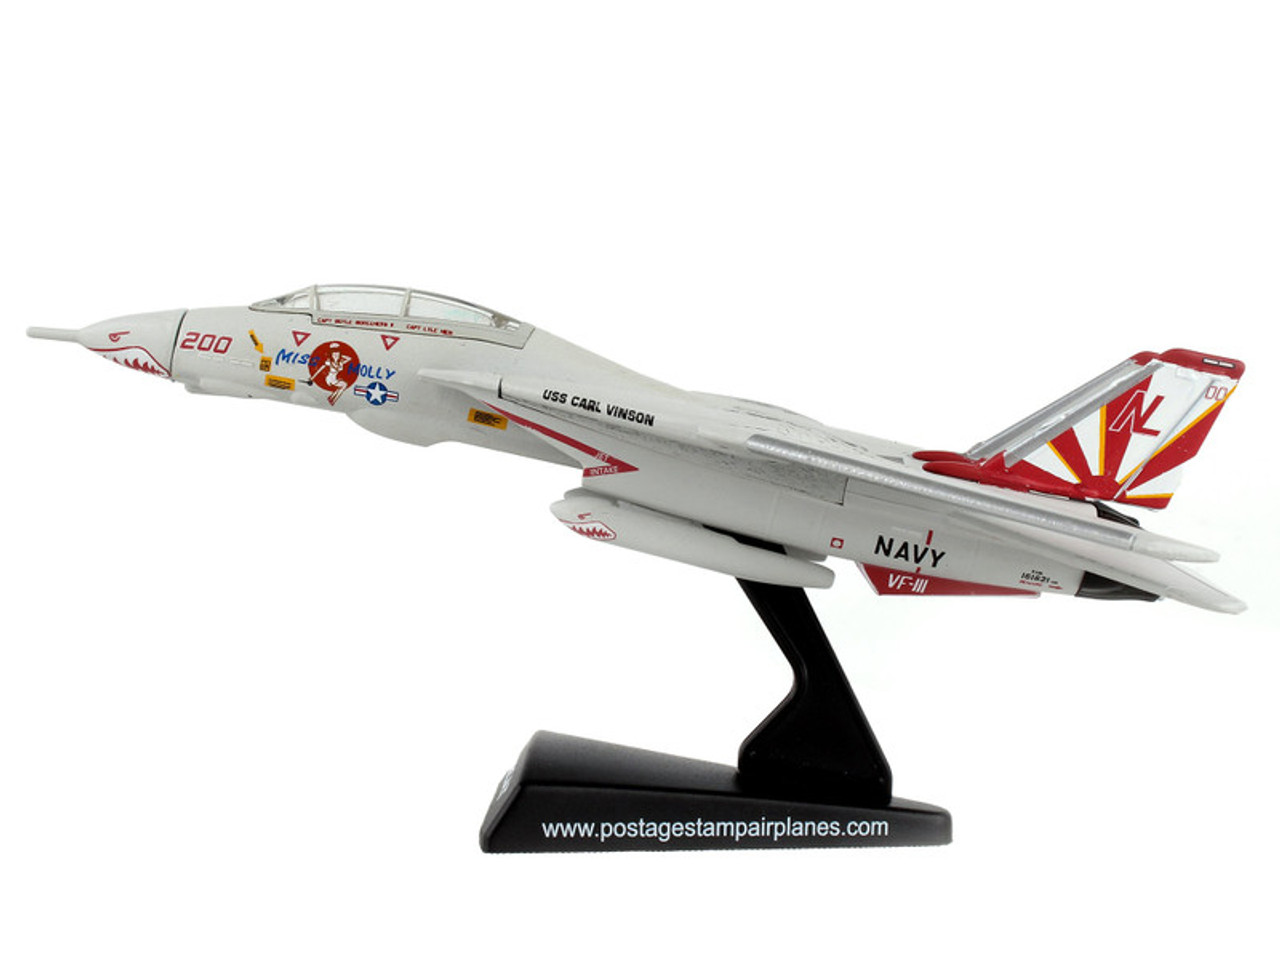 Grumman F-14 Tomcat Fighter Aircraft VF-111 Sundowners "Miss Molly" United States Navy 1/160 Diecast Model Airplane by Postage Stamp